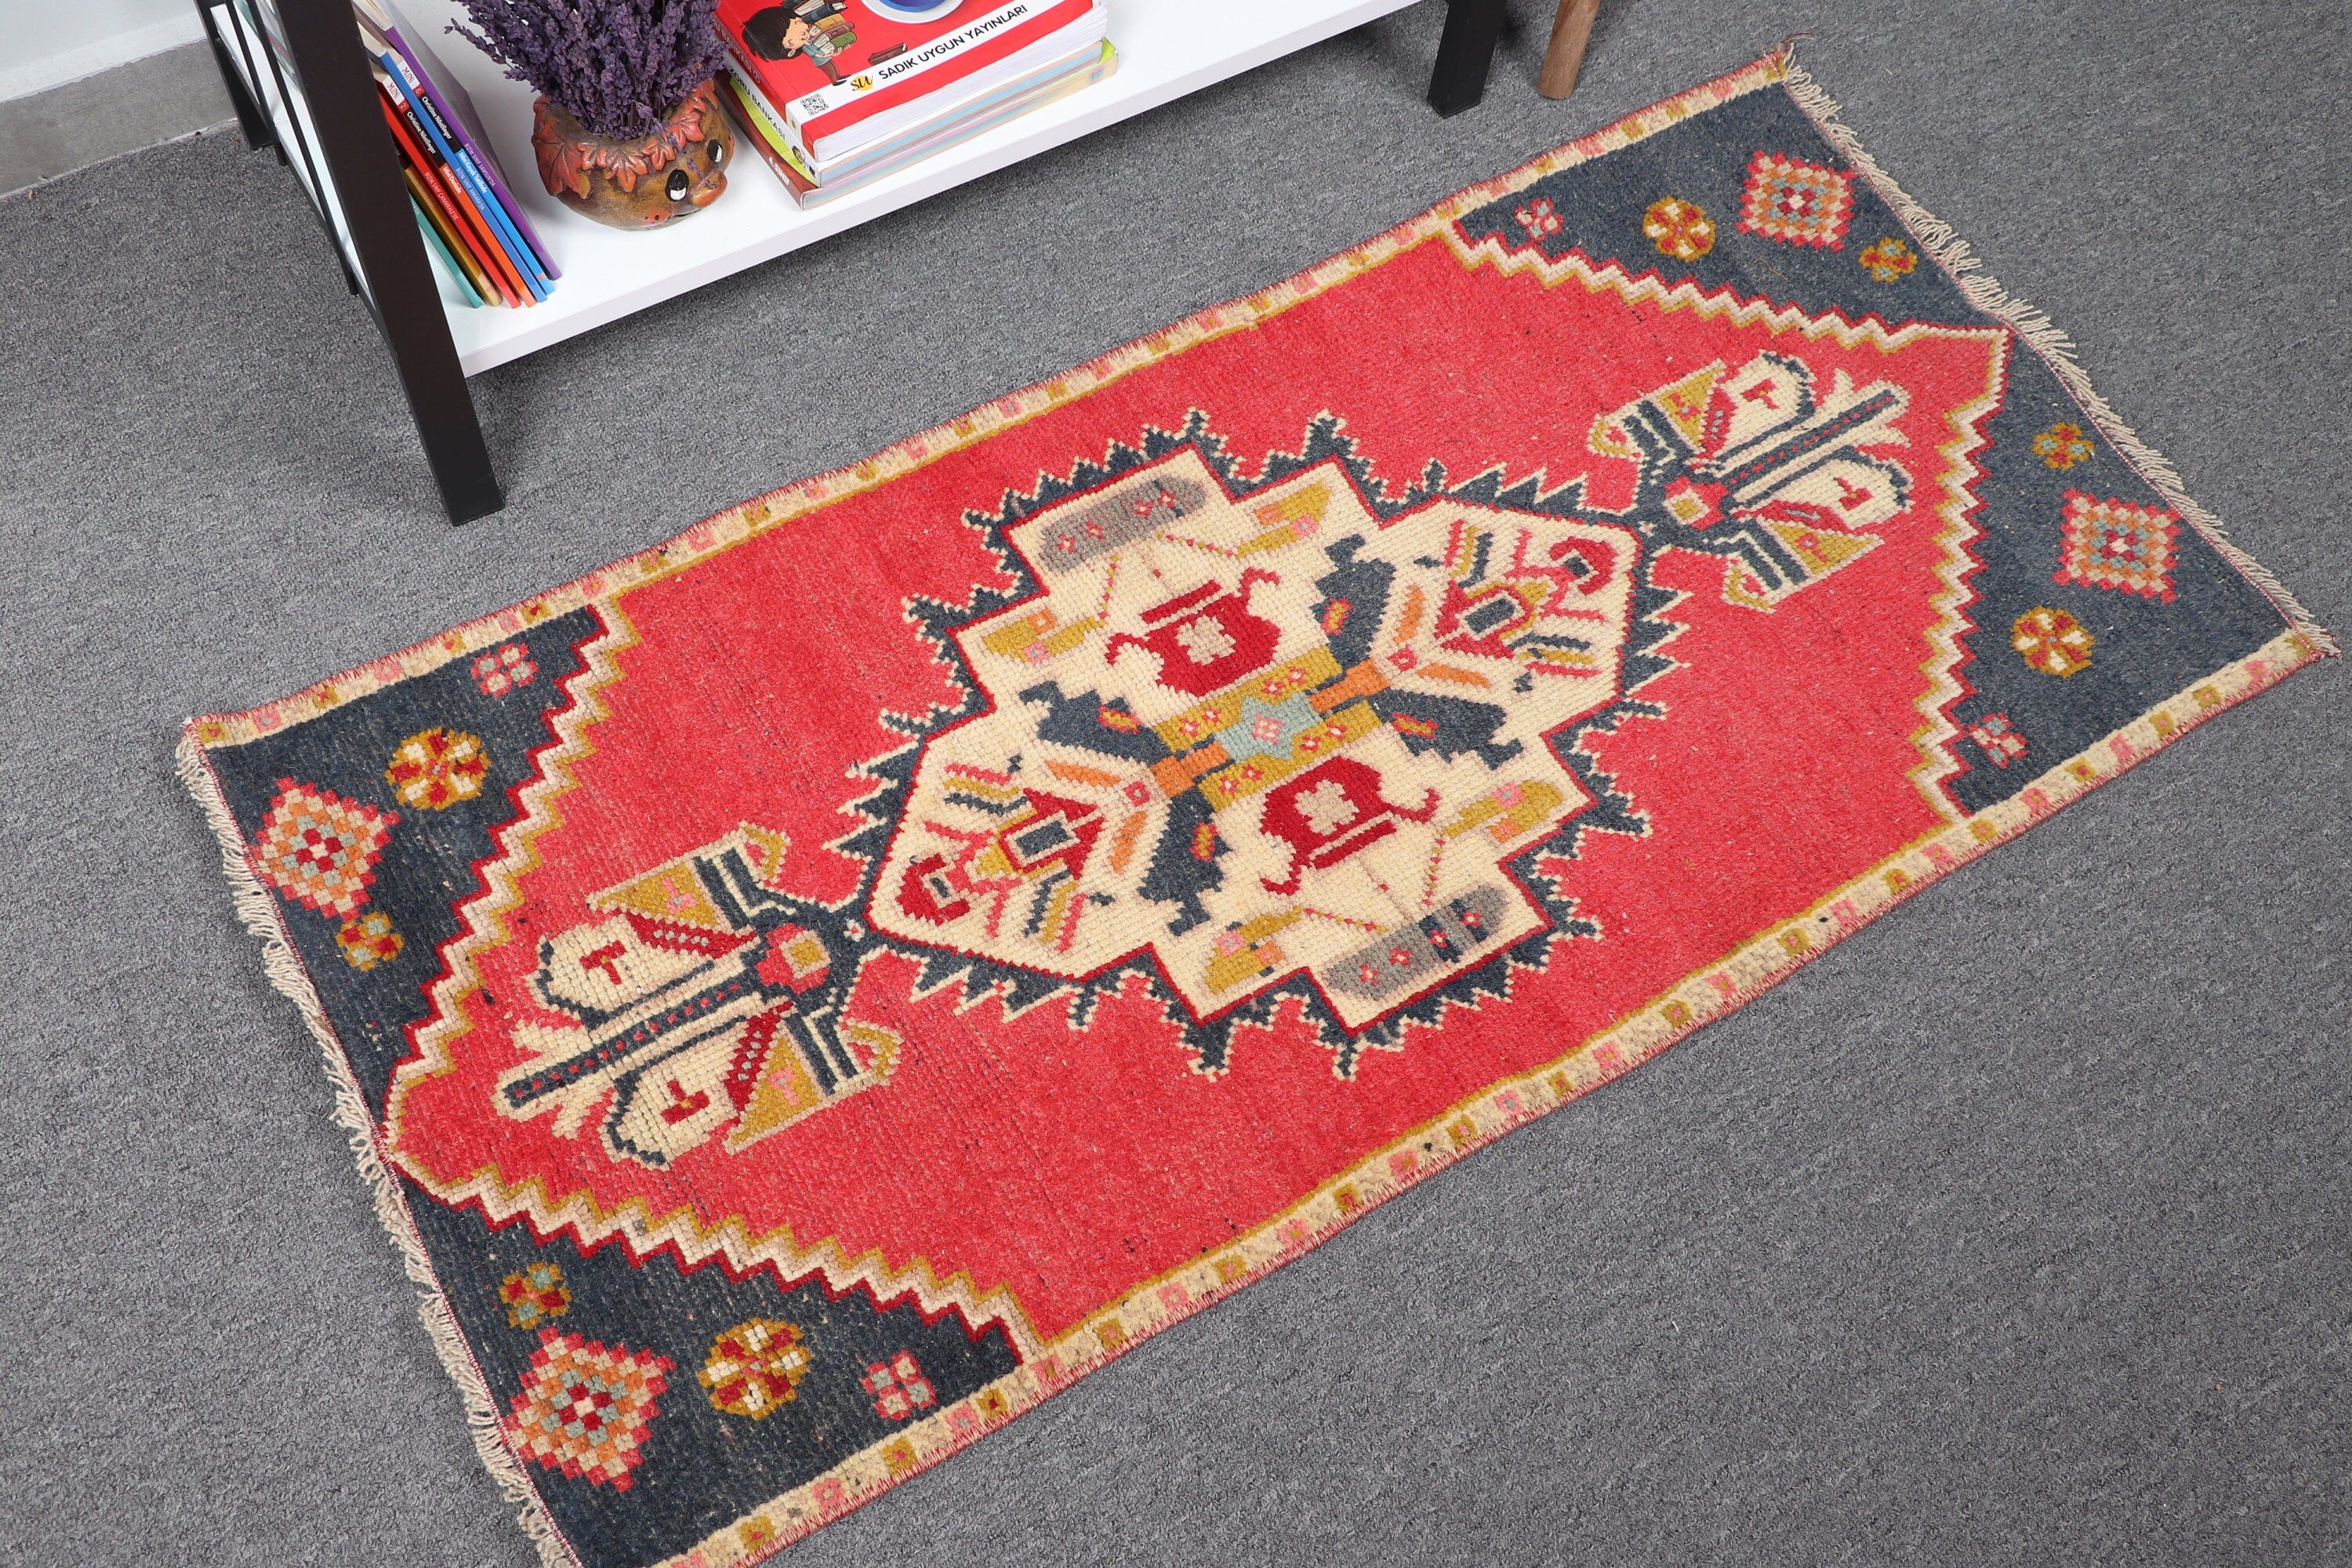 Vintage Rugs, Floor Rugs, Turkish Rugs, Car Mat Rug, Moroccan Rug, Wall Hanging Rug, 1.7x3.5 ft Small Rug, Bright Rugs, Red Kitchen Rugs